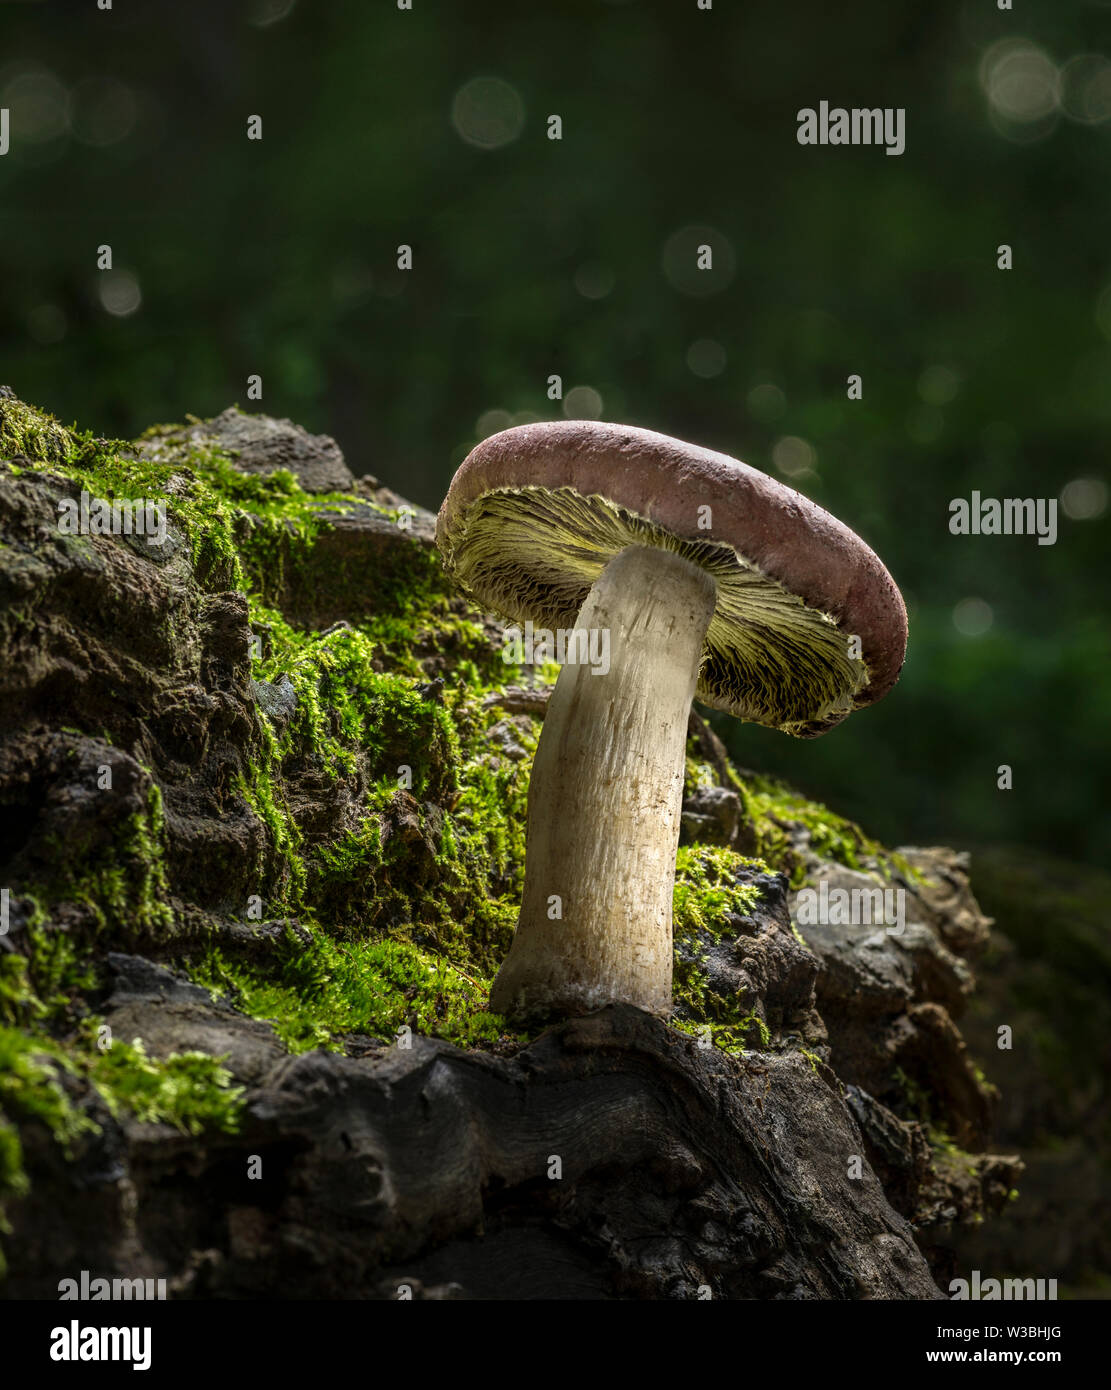 Mushroom Growing on Mossy Log In Forest Stock Photo